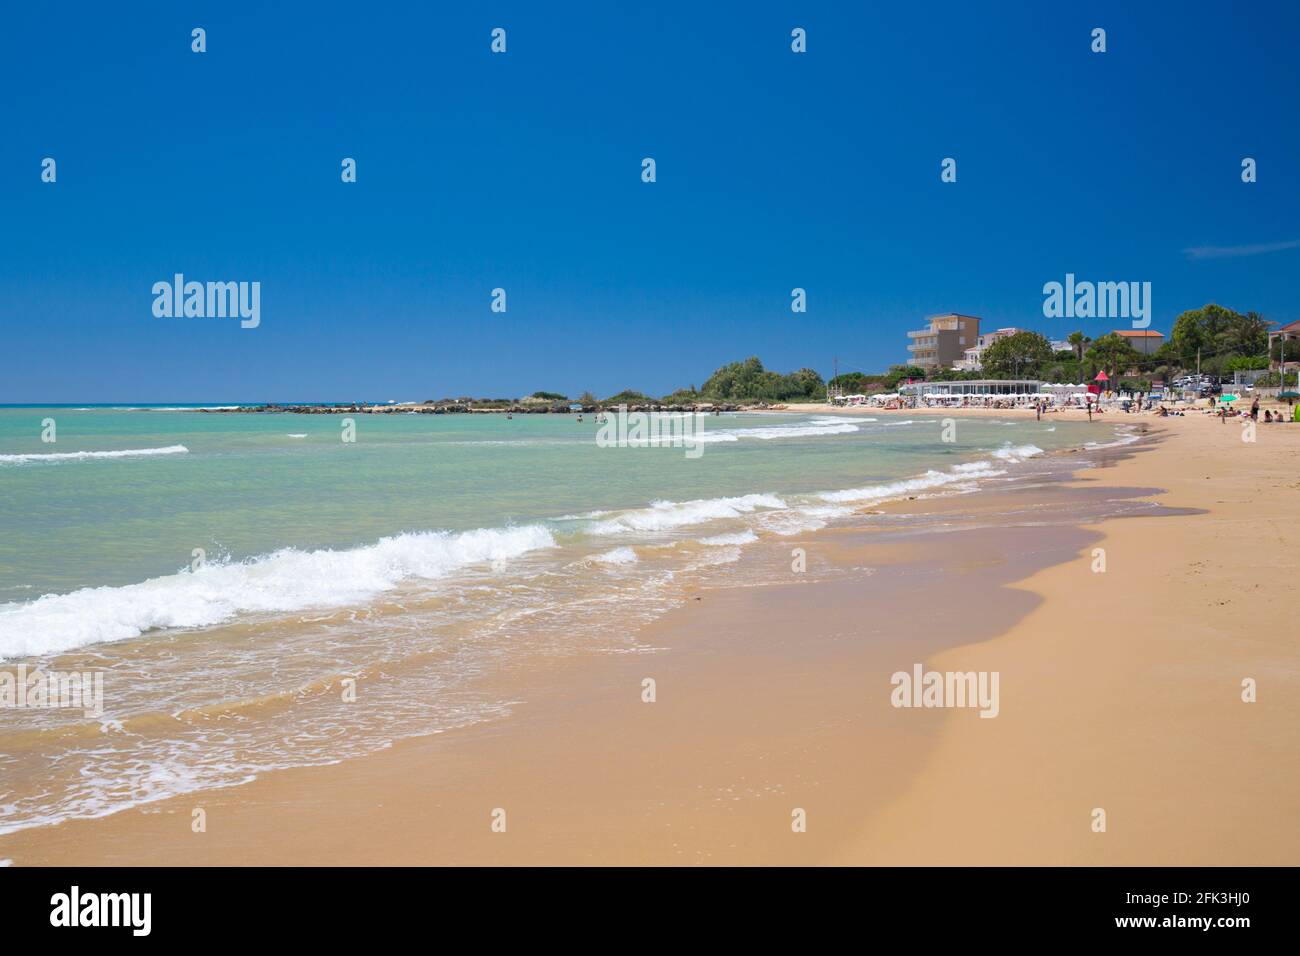 Realmonte, Agrigento, Sicily, Italy. View across bay from sandy beach, waves breaking on shore. Stock Photo